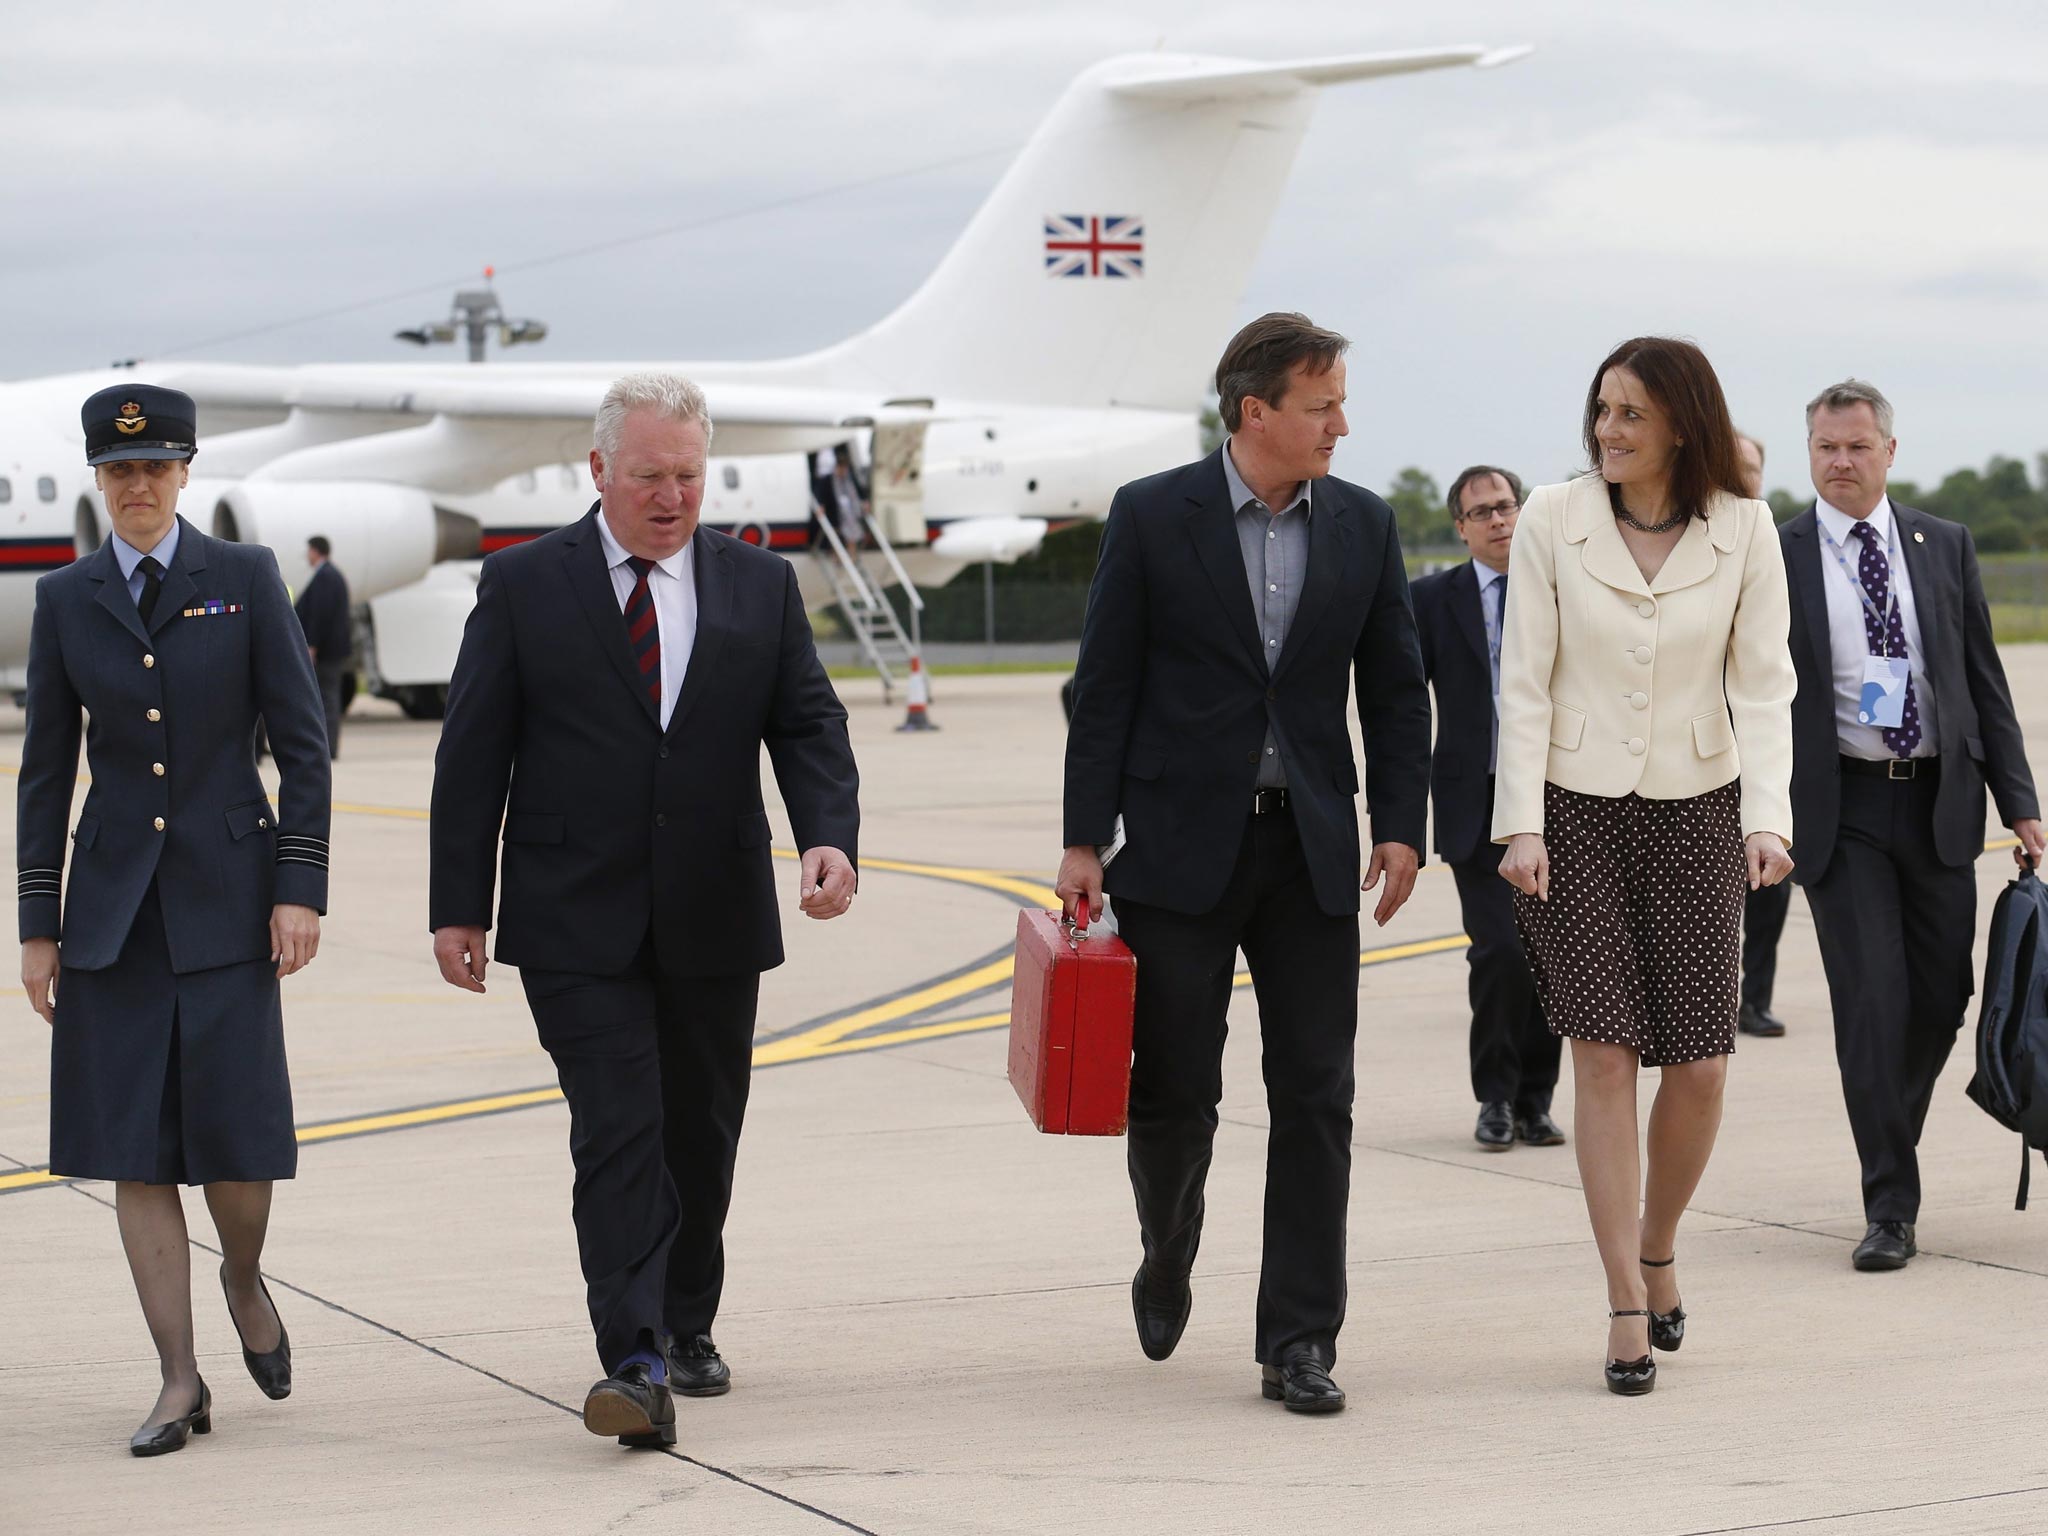 Britain's Prime Minister David Cameron walks with Northern Ireland Secretary Theresa Villiers (second right) and Wing Commander Faye Wiseman (left) after arriving in Belfast, Northern Ireland